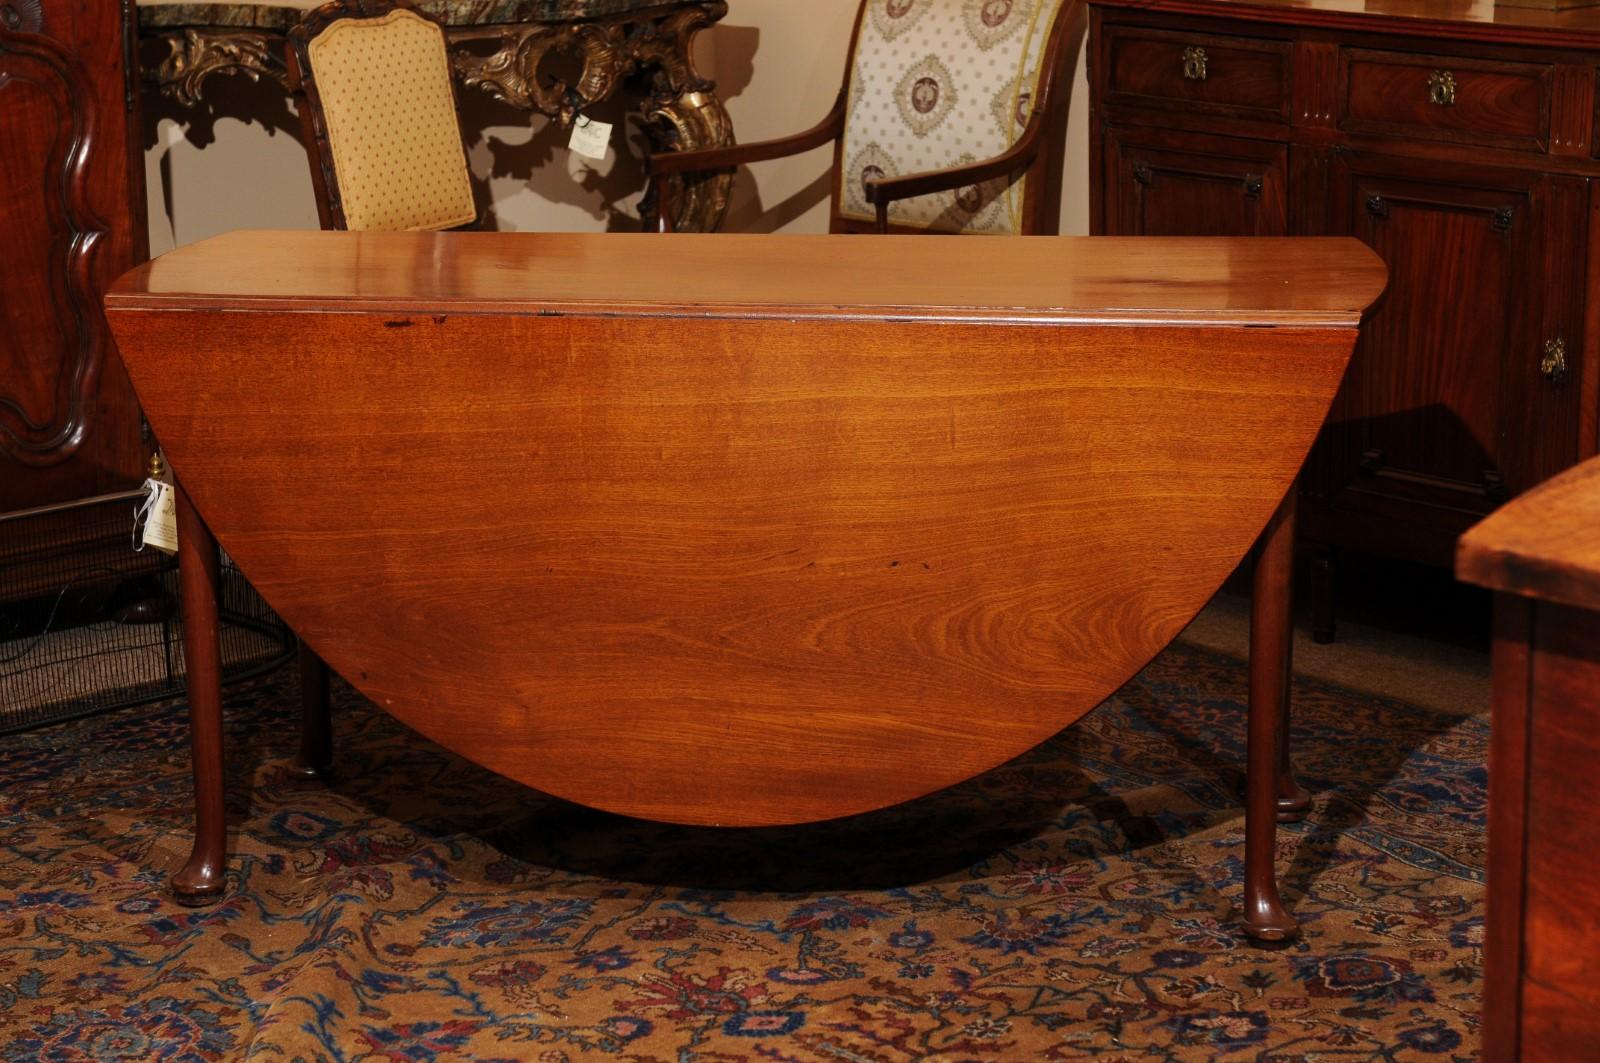  Mid-18th C English George II Mahogany Drop Leaf Oval Dining Table with Pad Feet For Sale 8